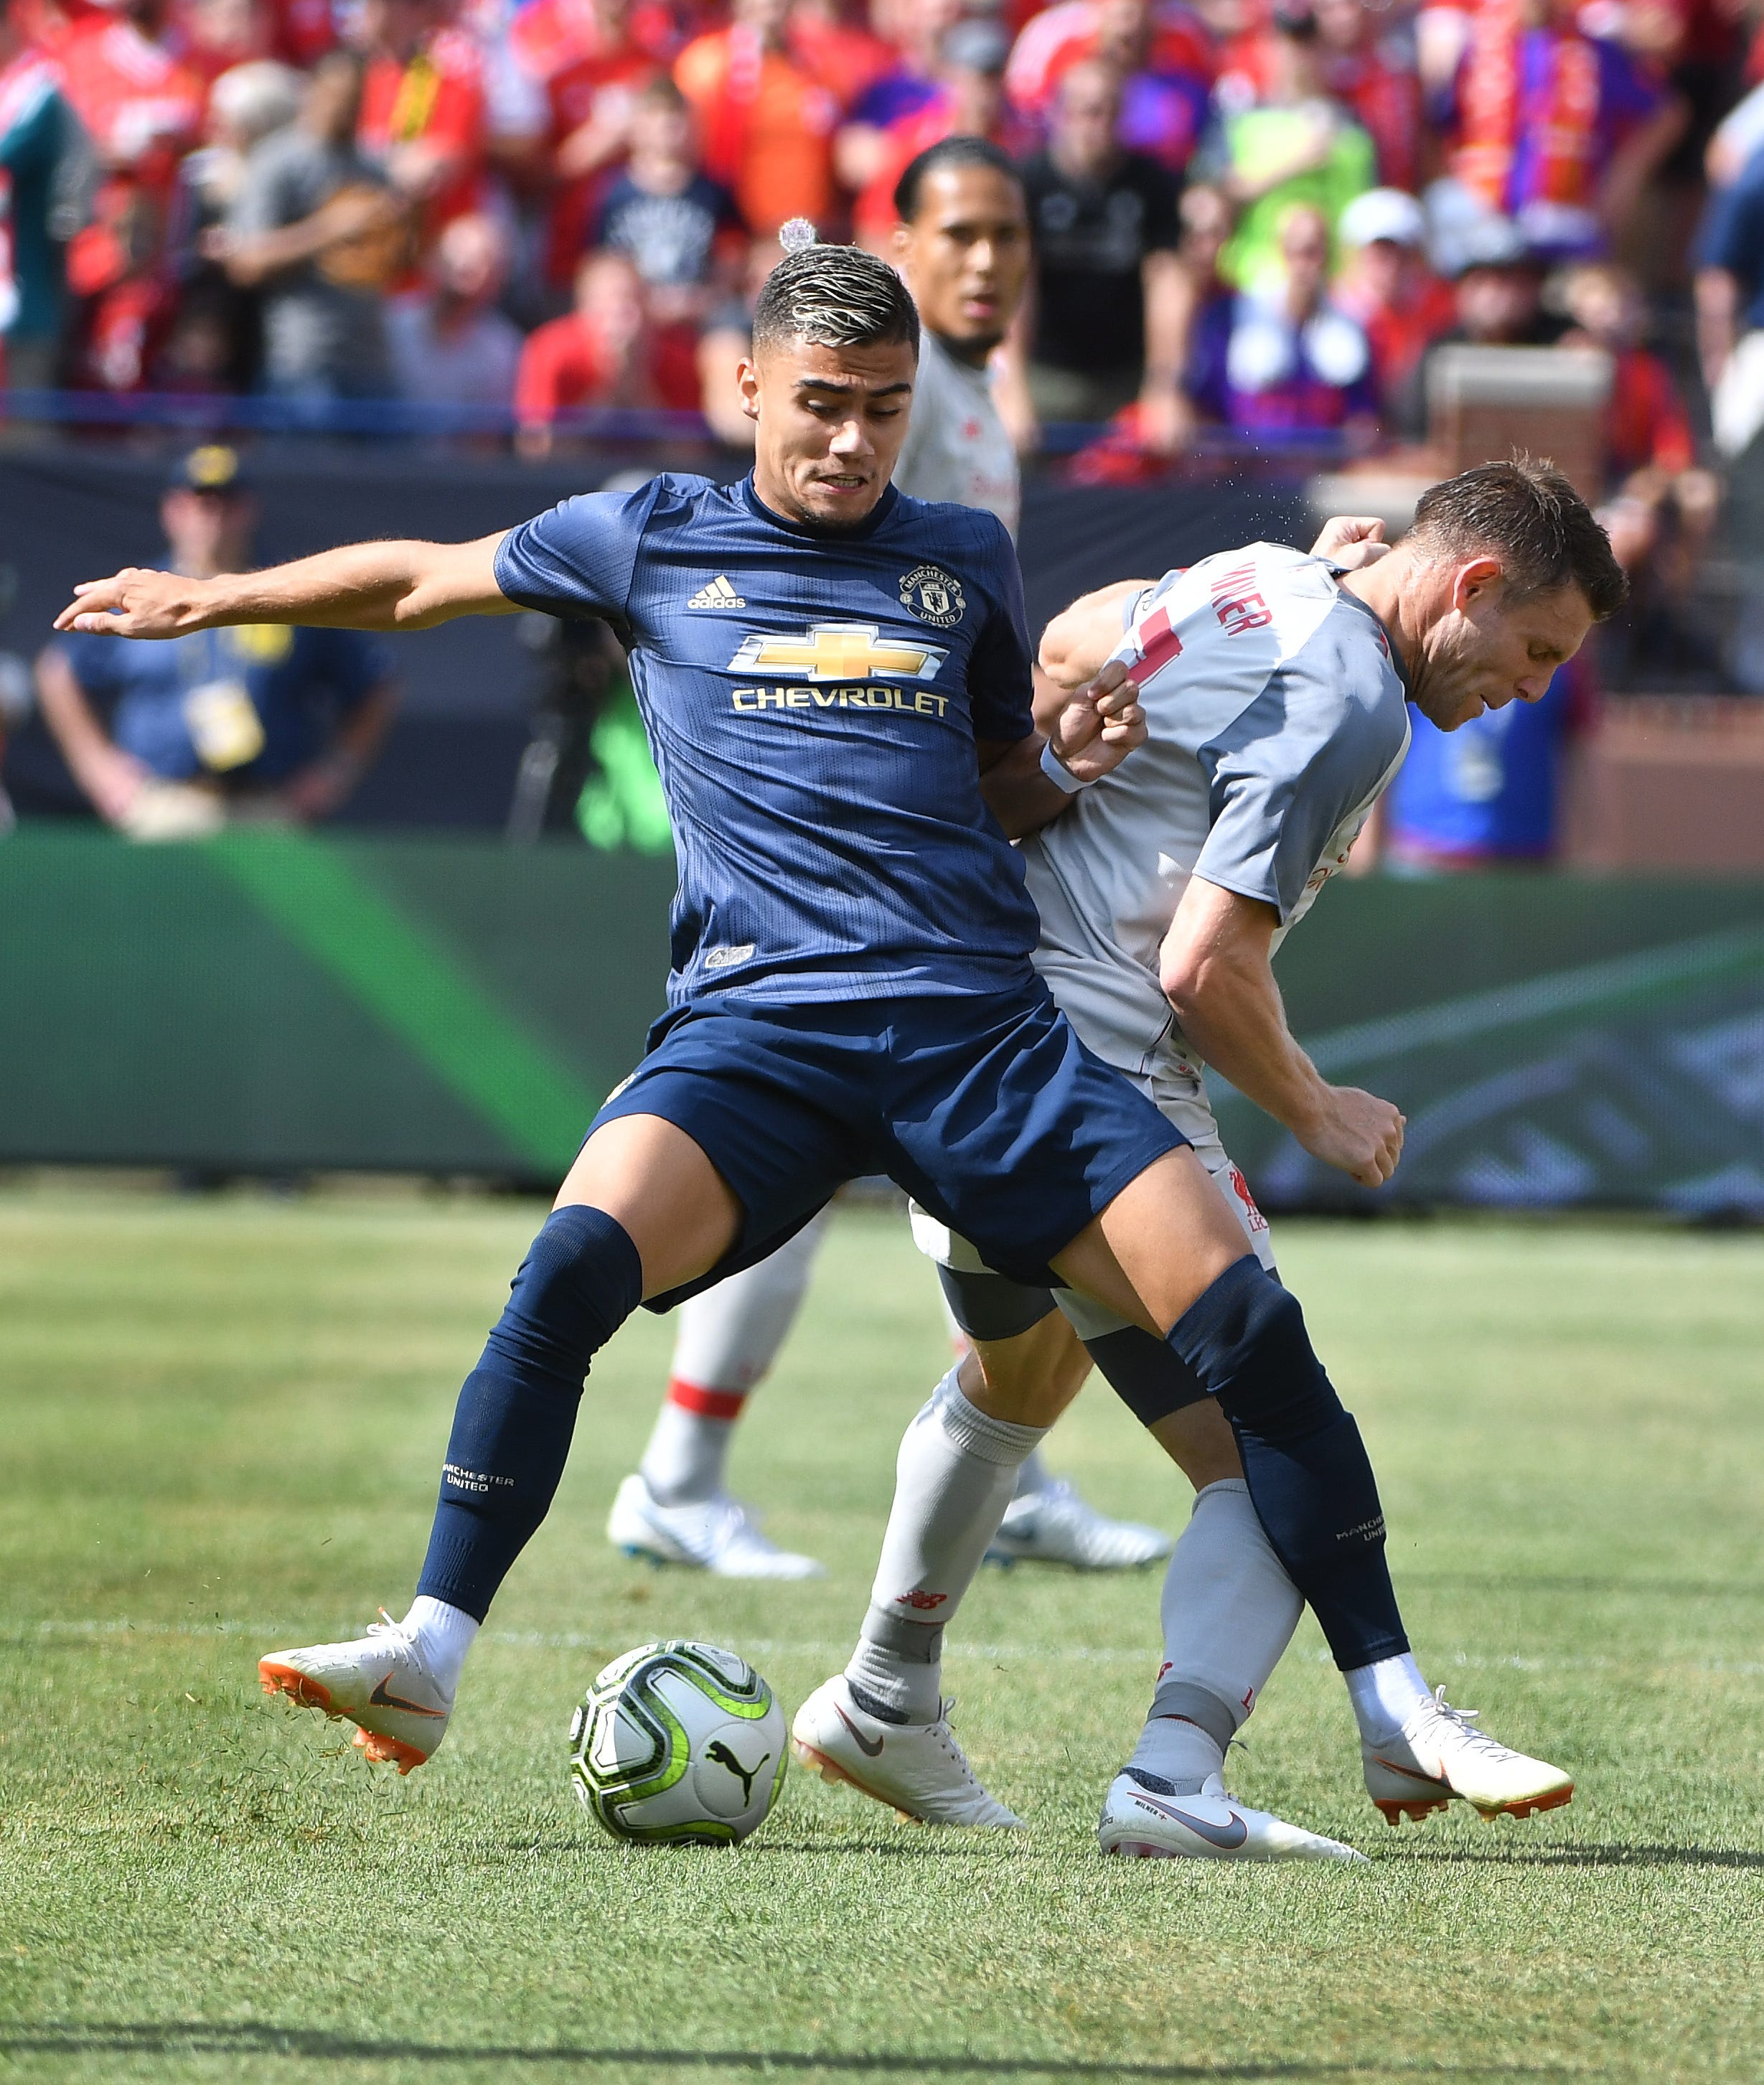 Manchester's Andreas Pereira and Liverpool's James Milner battle for the ball in the first half.